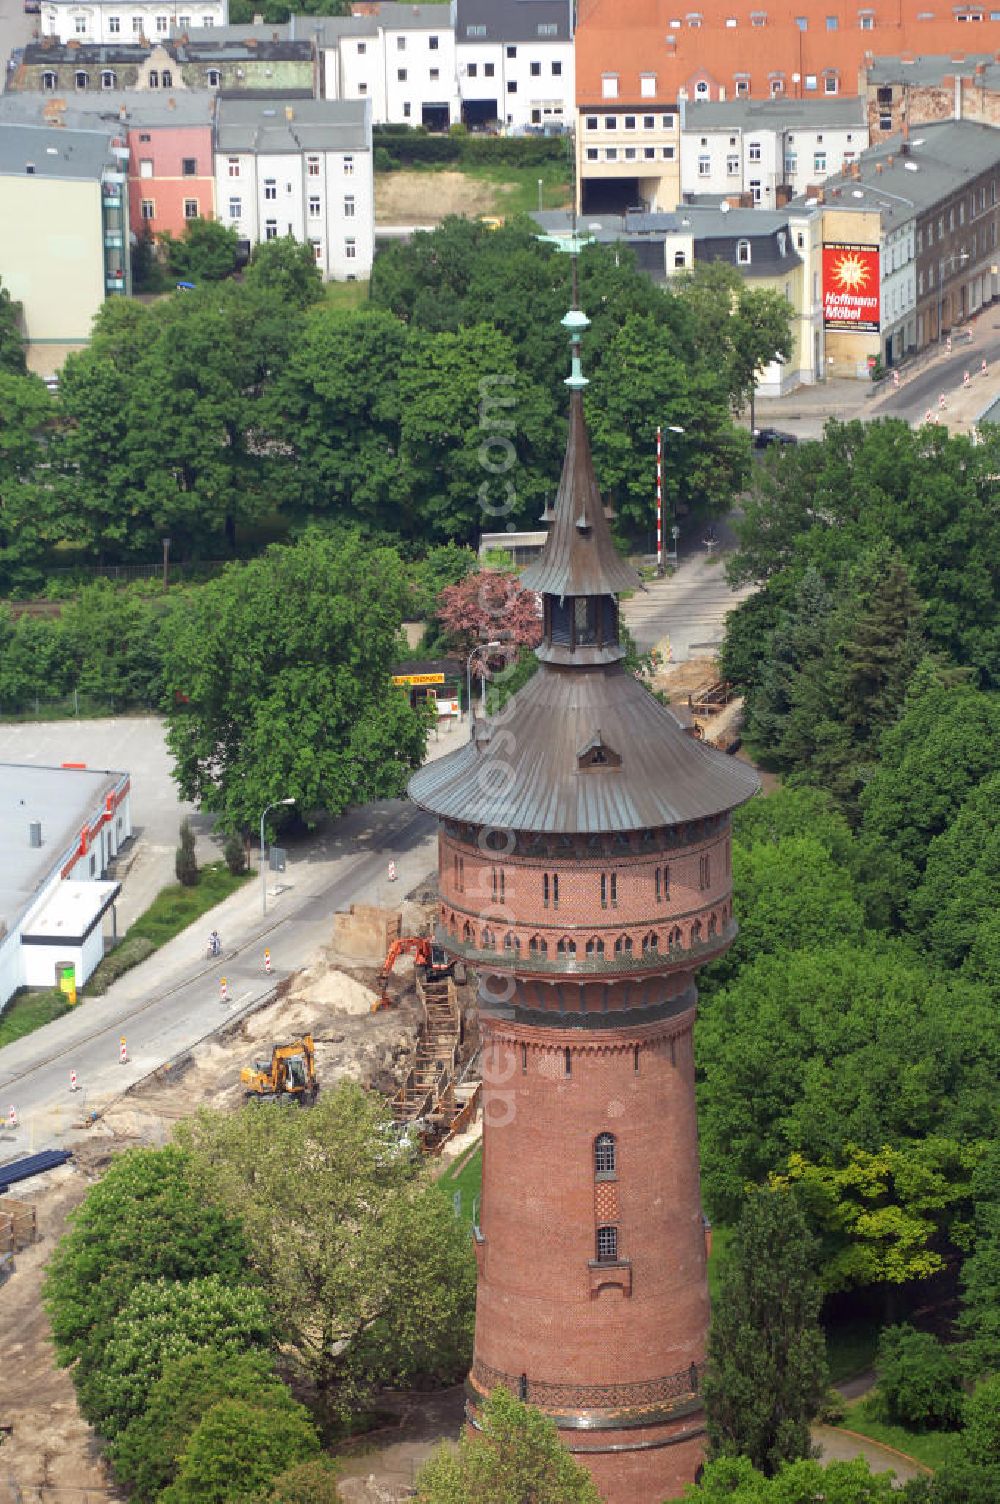 Forst / Lausitz from the bird's eye view: Built from the 1901-1903 and popularly called our Thicker water tower on the street Spremberger Strasse in Forst in the Lusatia